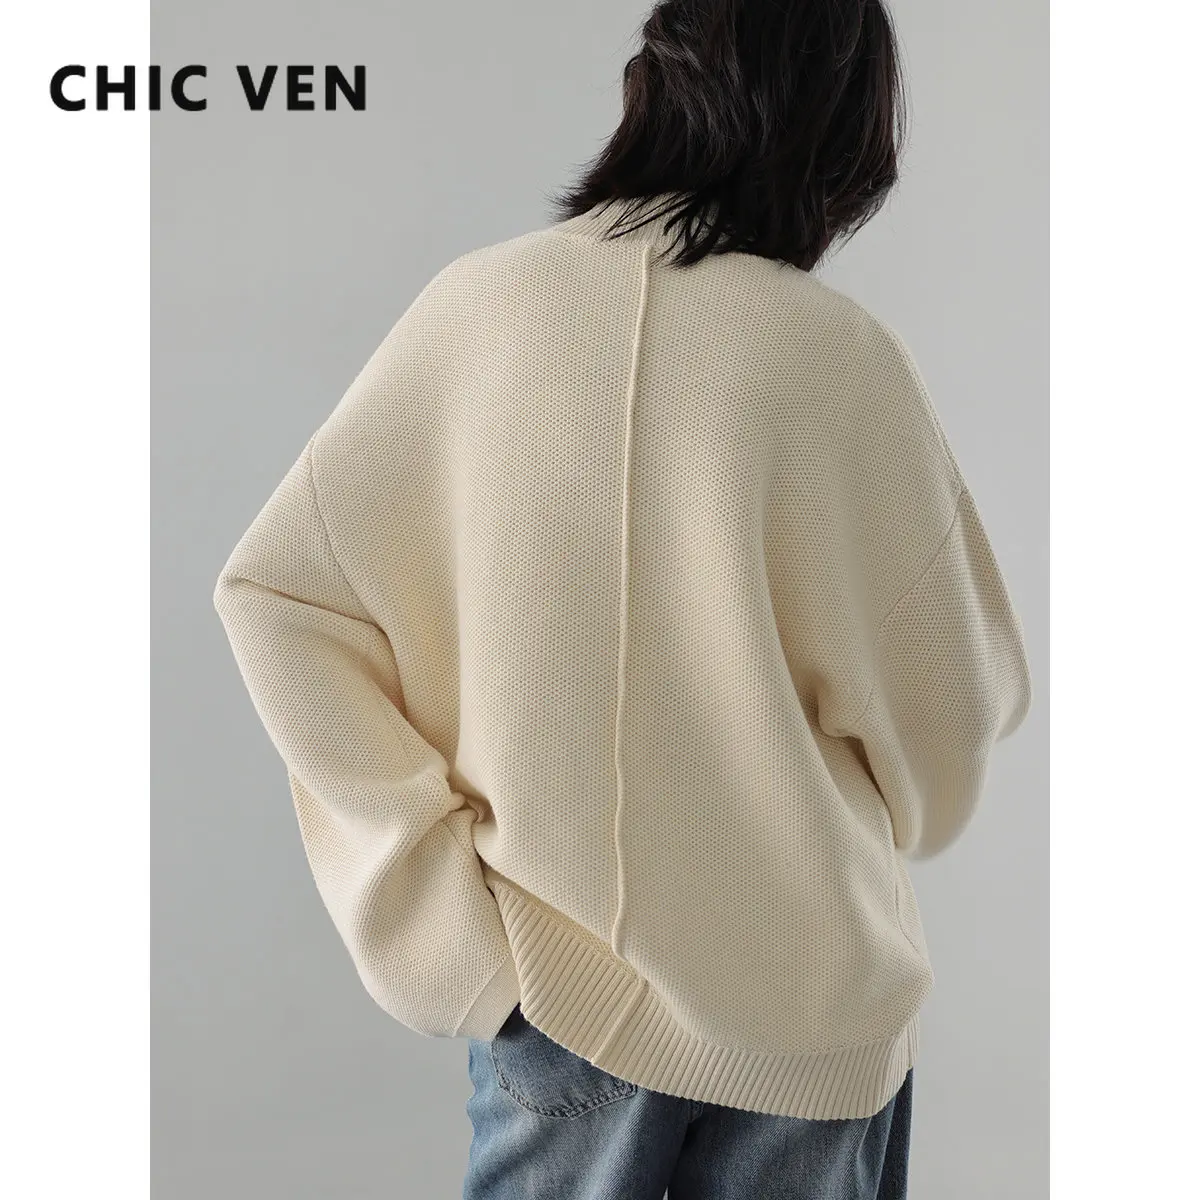 CHIC VEN Simple Split Design Loose Half High Collar Pullover Sweater Knit Solid Women Jumpers Korean Fashion Autumn Winter 2022